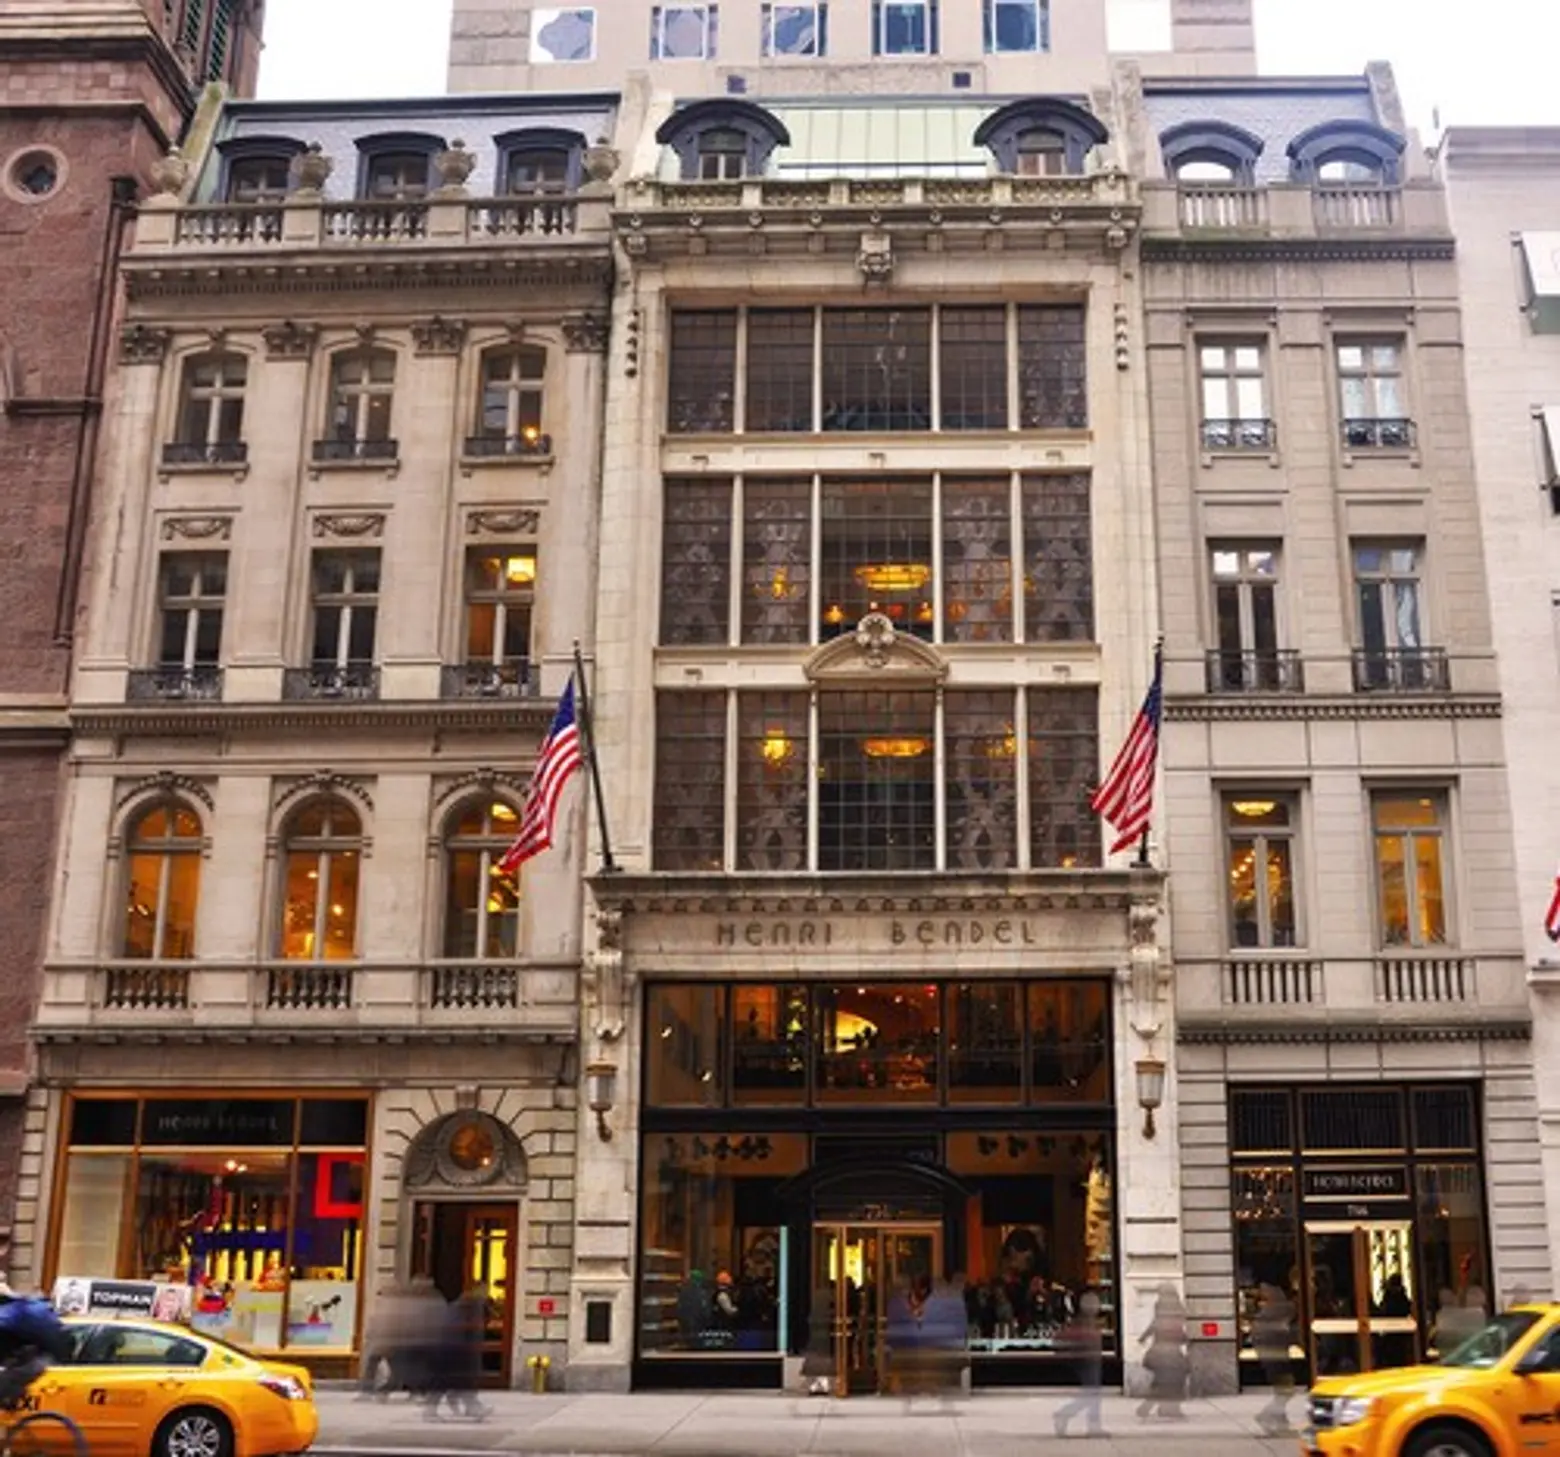 Coty Building with Rene Lalique windows, now occupied by Henri Bendel. 714 Fifth Avenue.